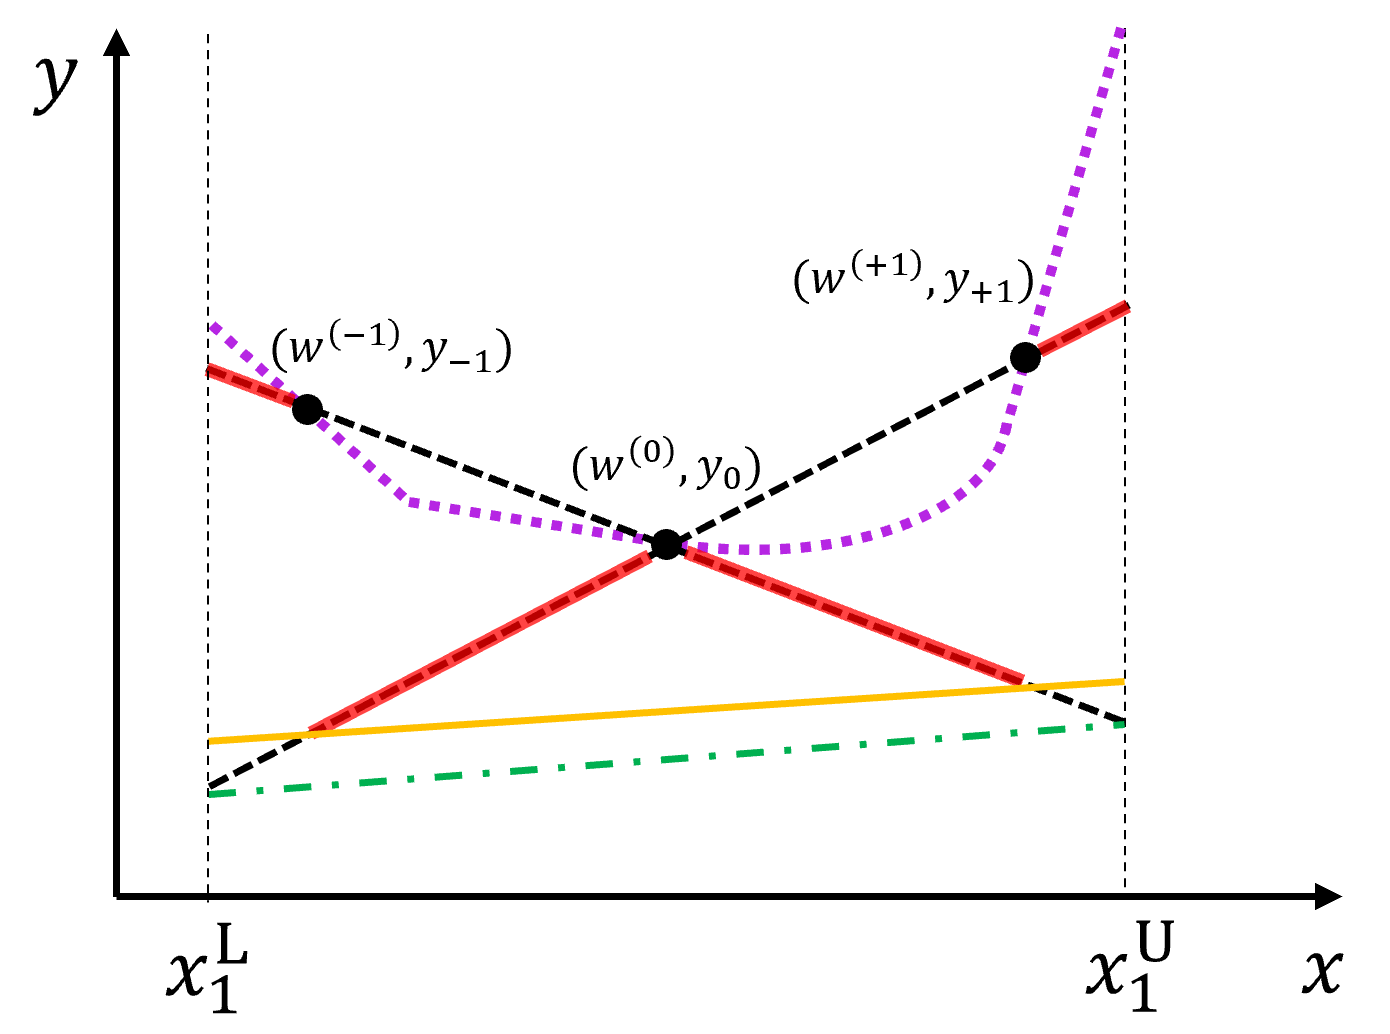 plot of affine relaxations obtained by sampling